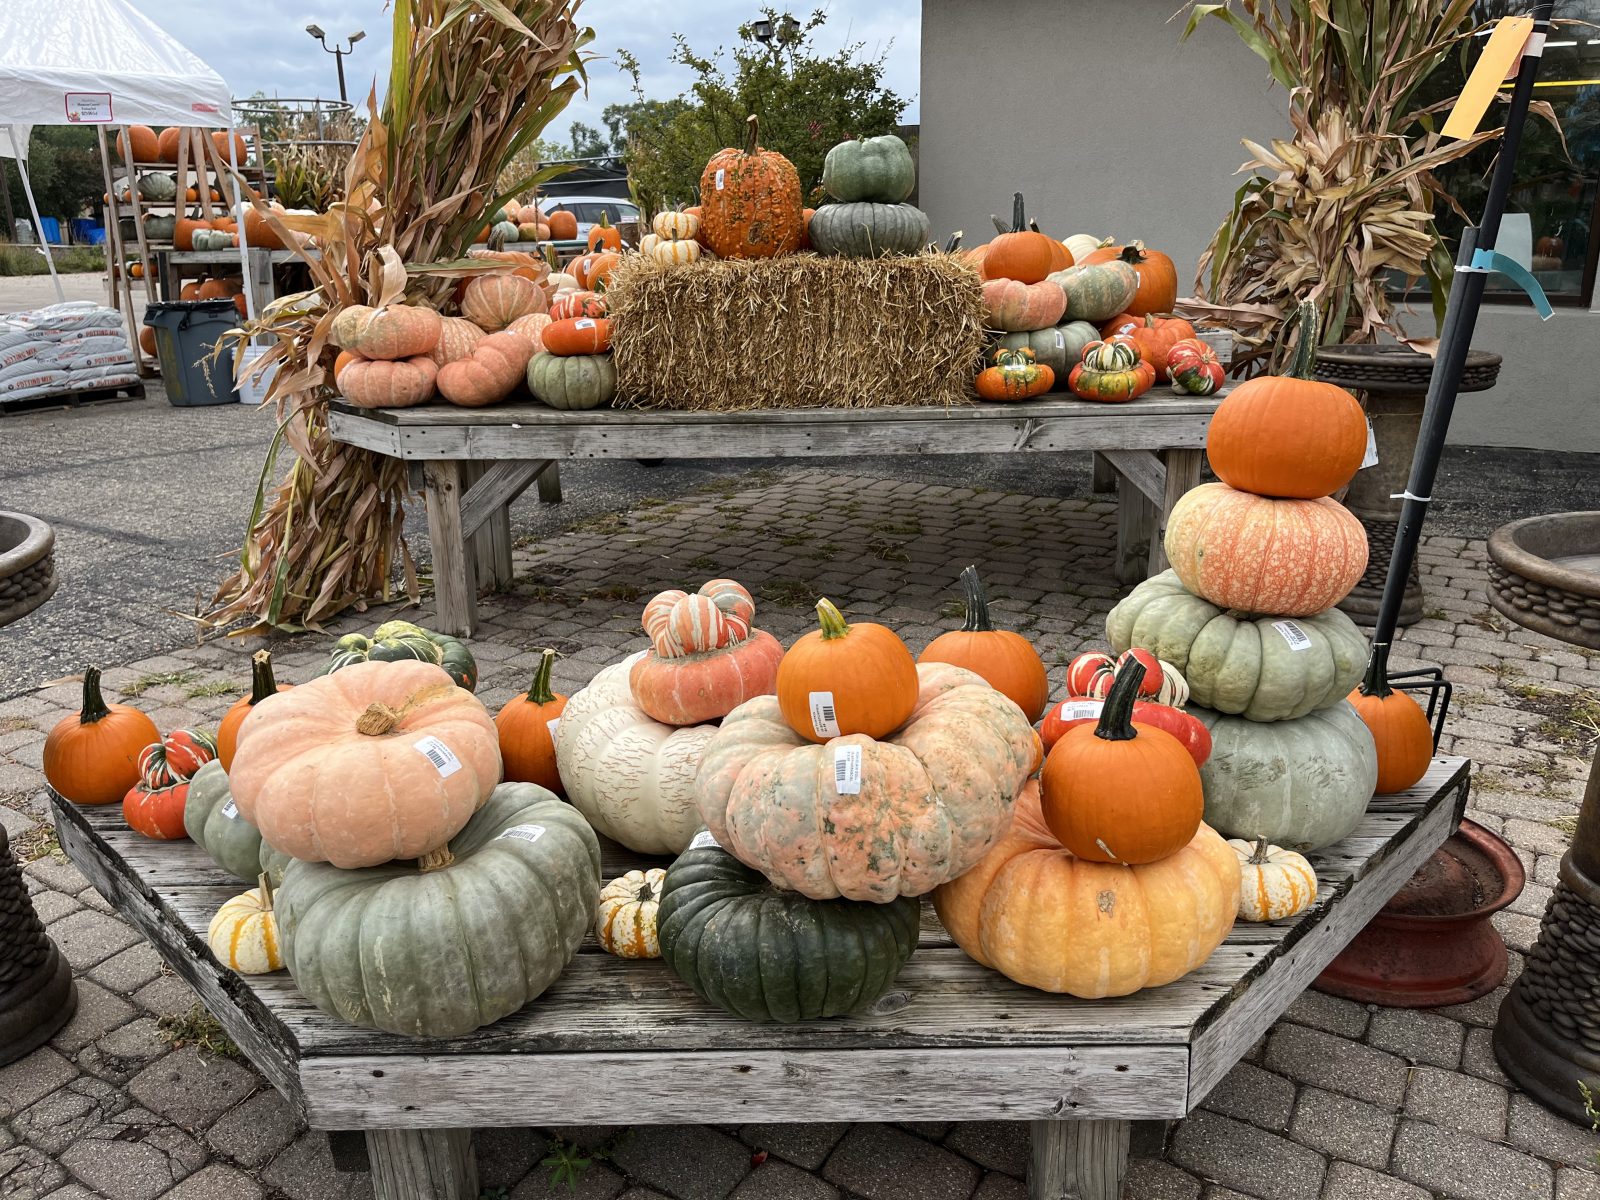 A display of pumpkins on a table.